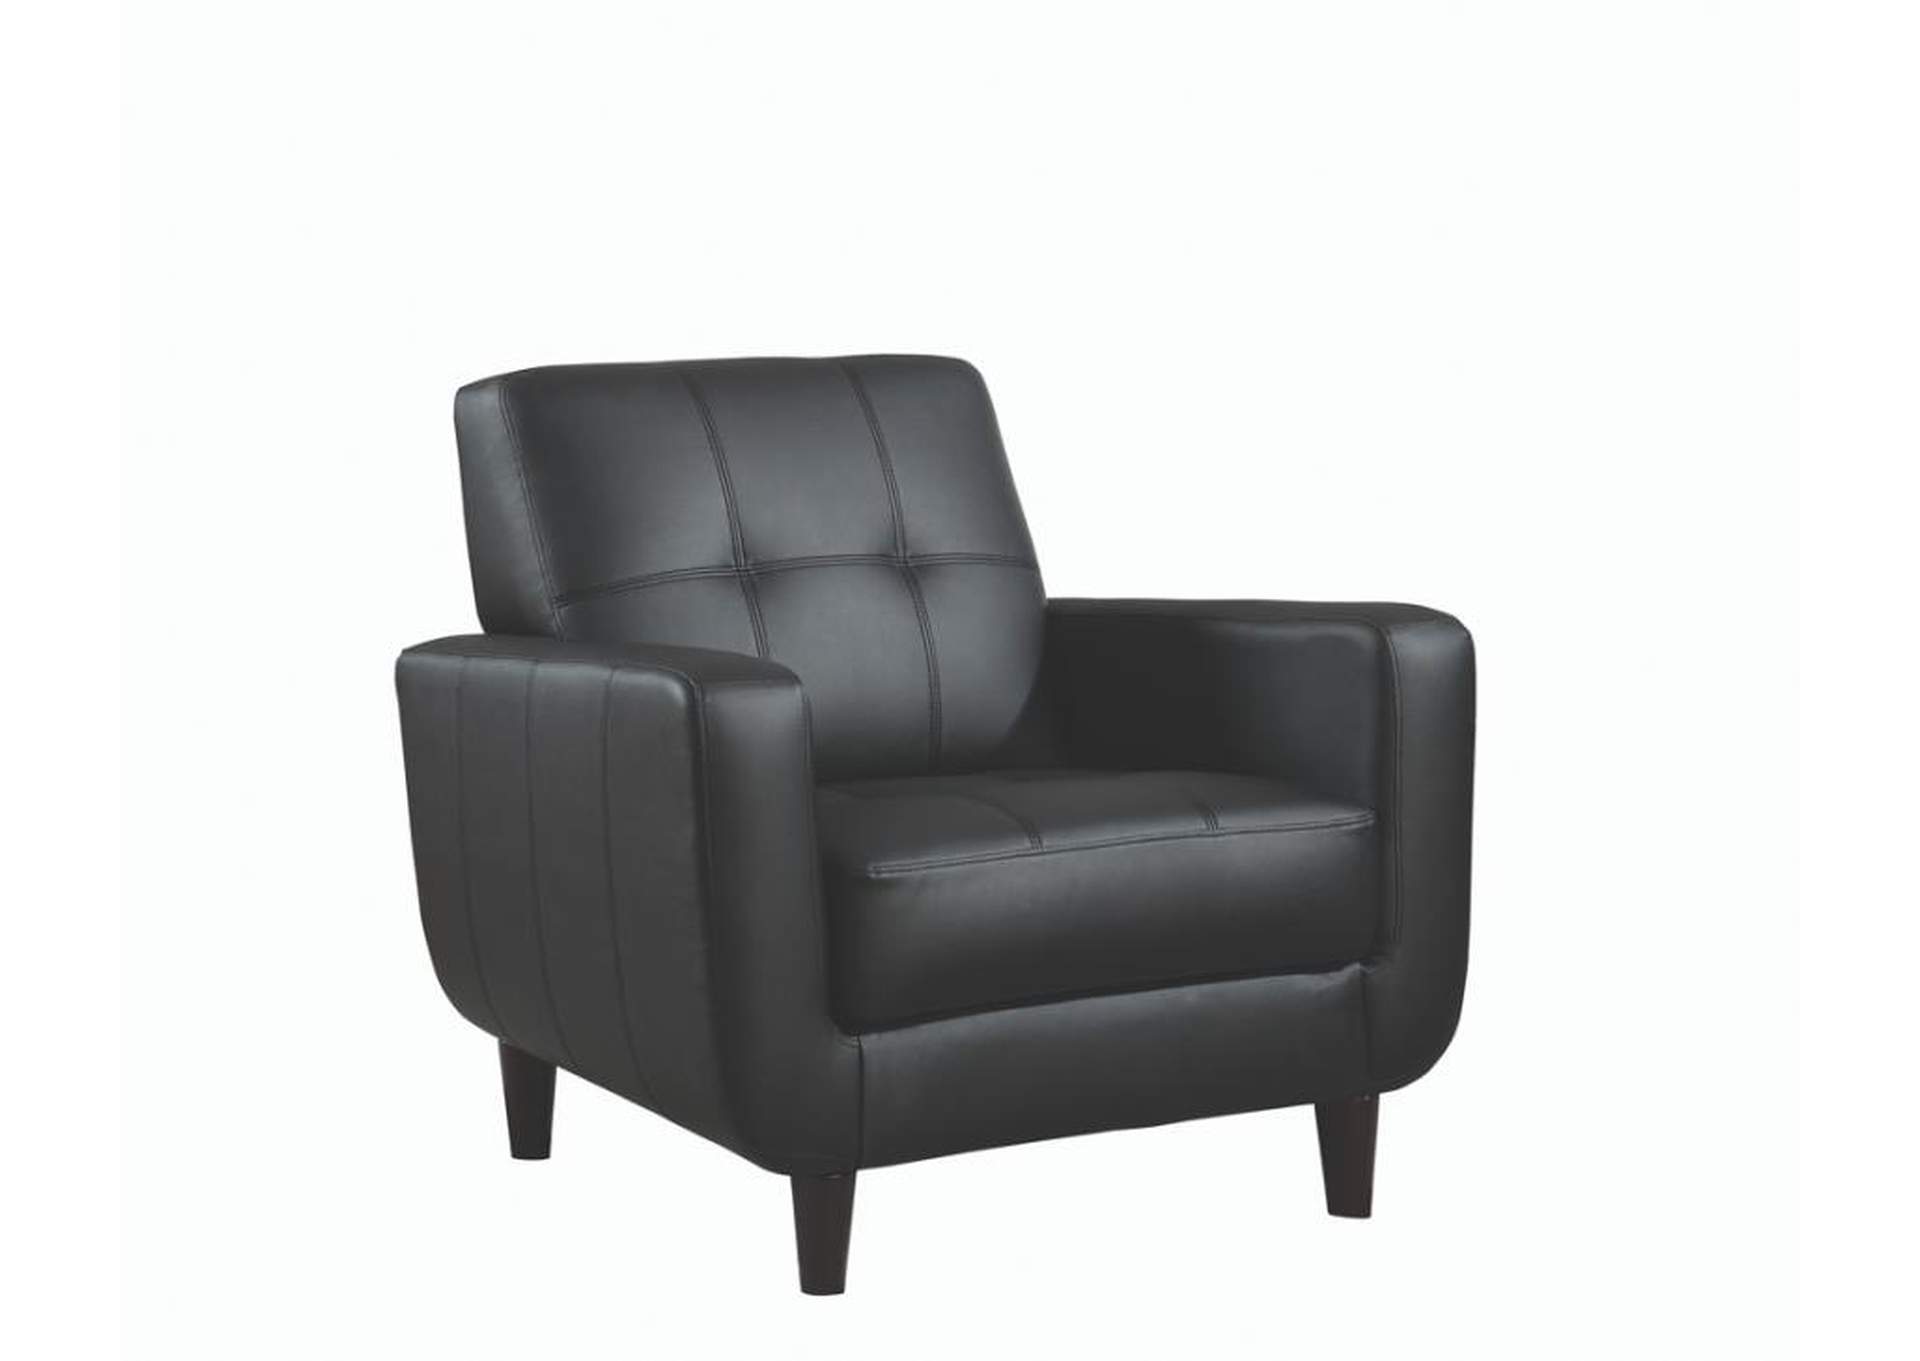 Aaron Padded Seat Accent Chair Black,Coaster Furniture